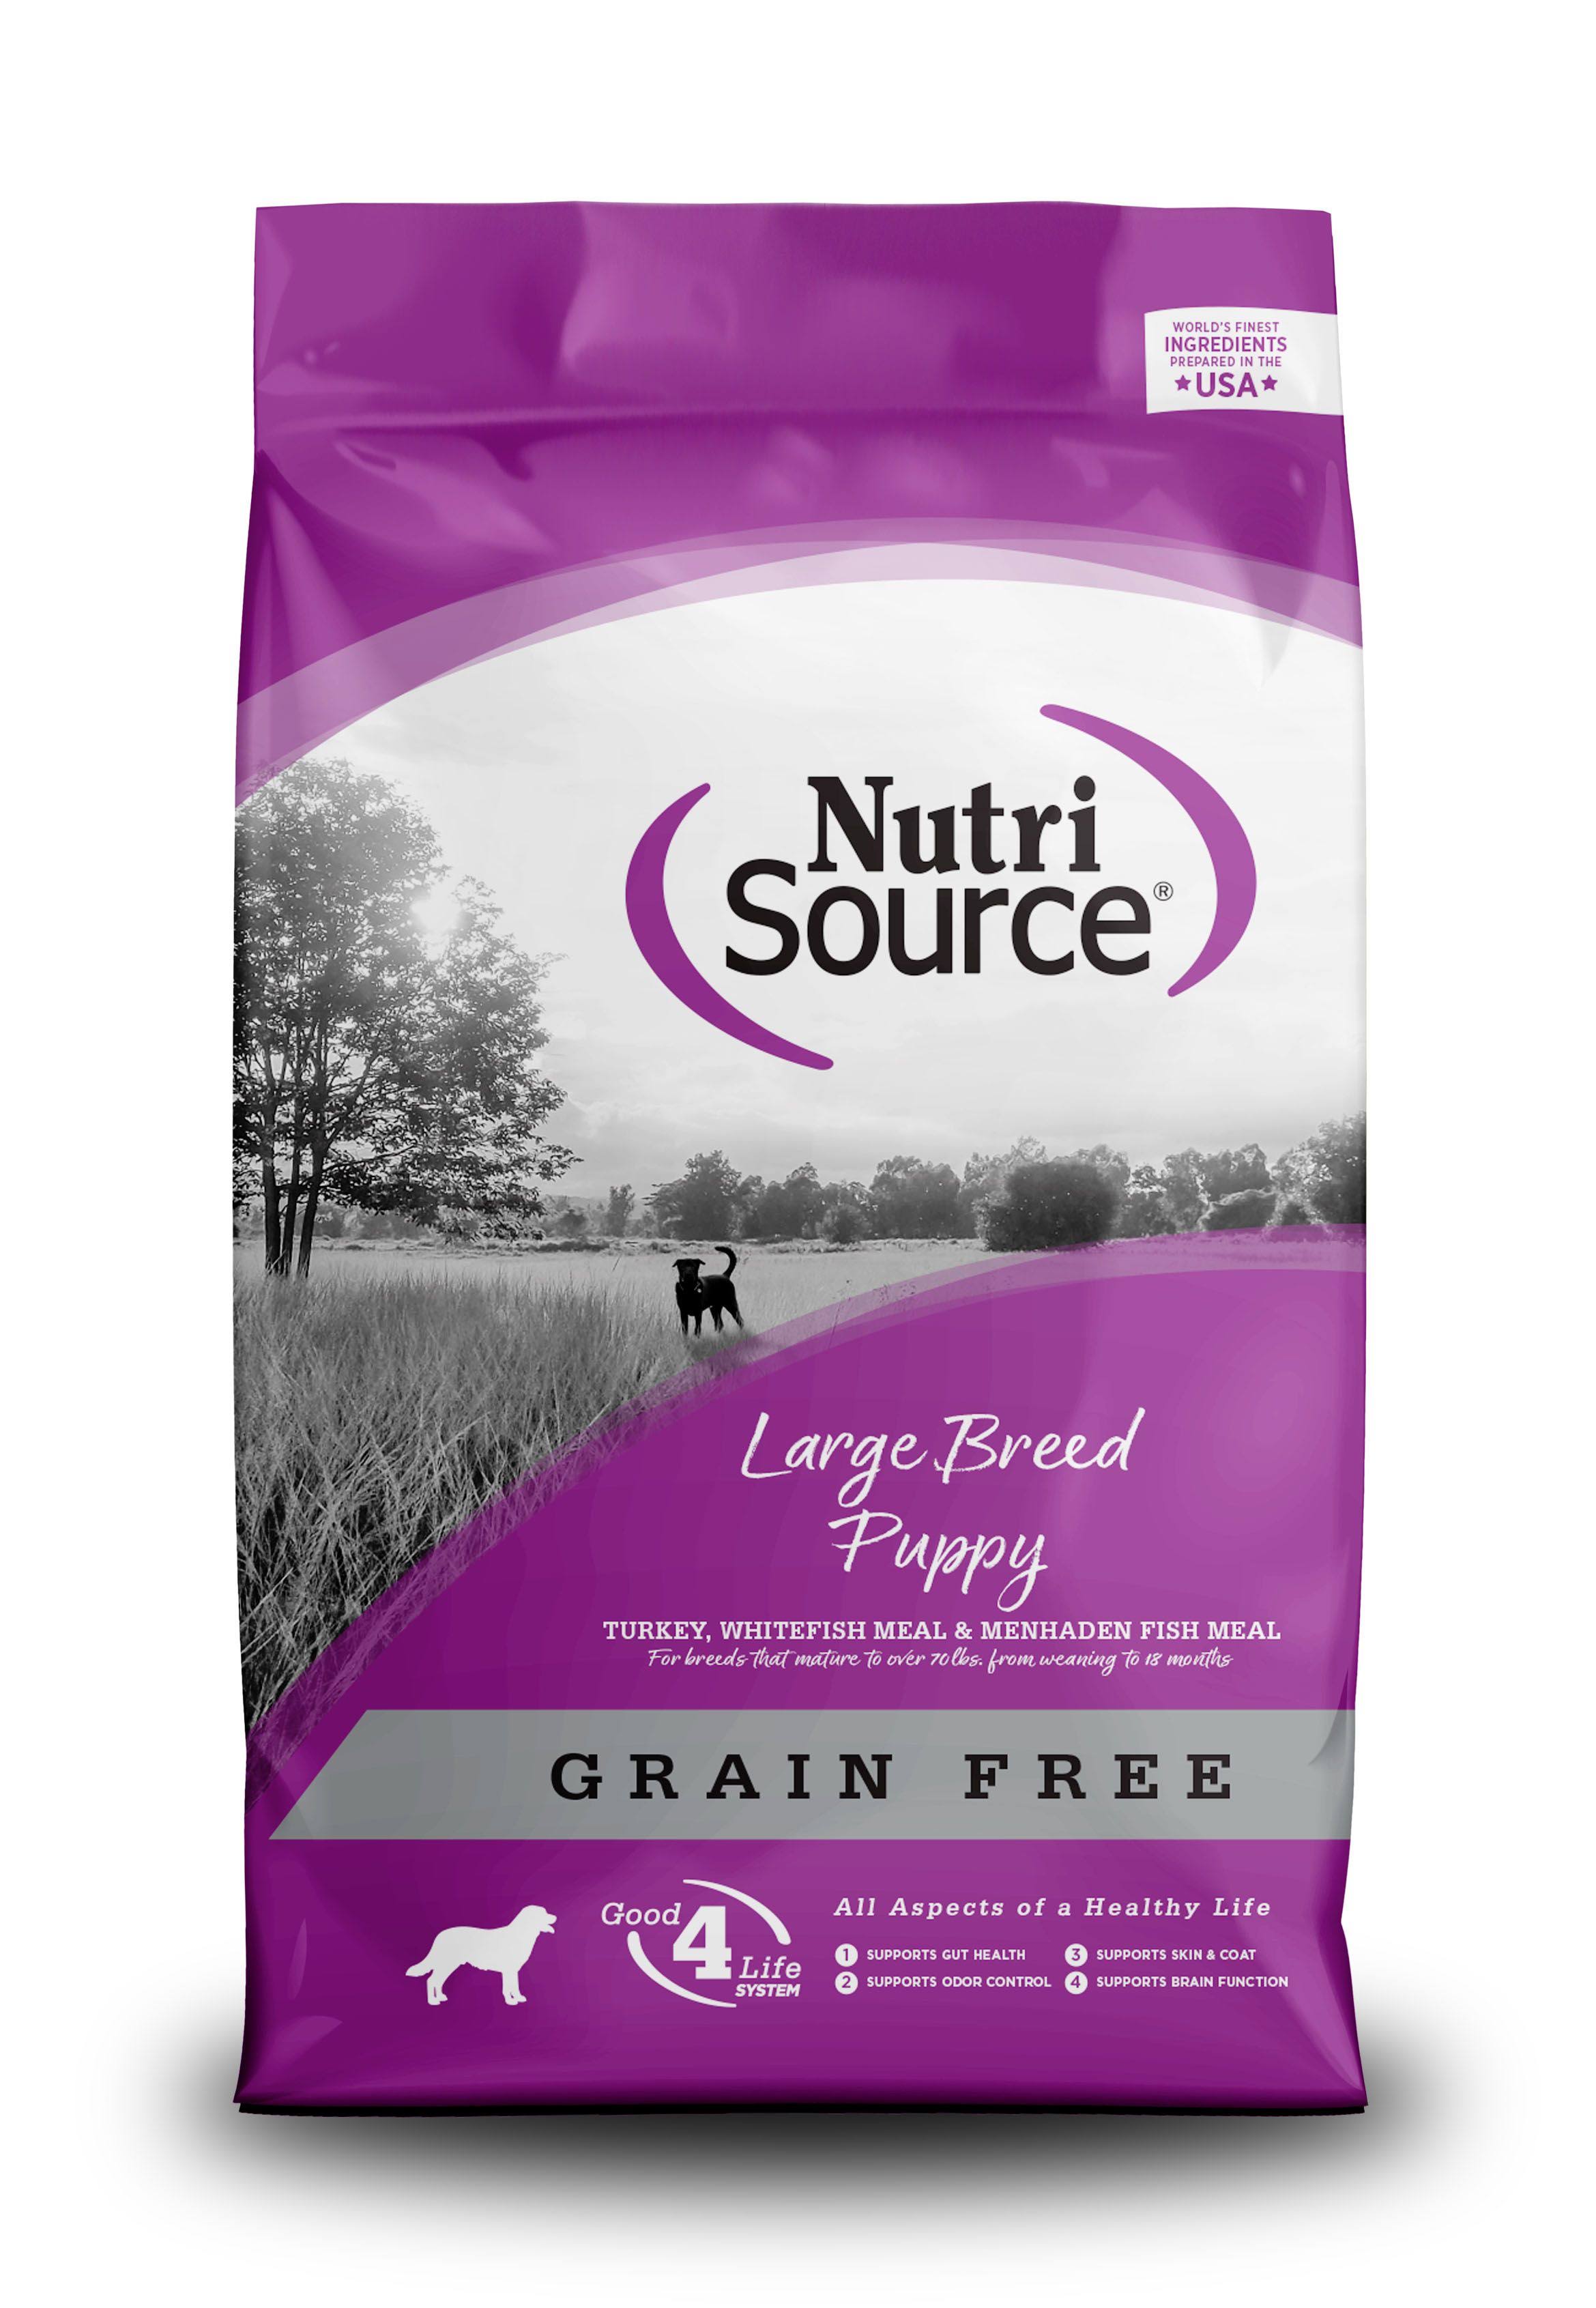 NutriSource Grain Free Large Breed Puppy Recipe Dry Dog Food, 5-lb